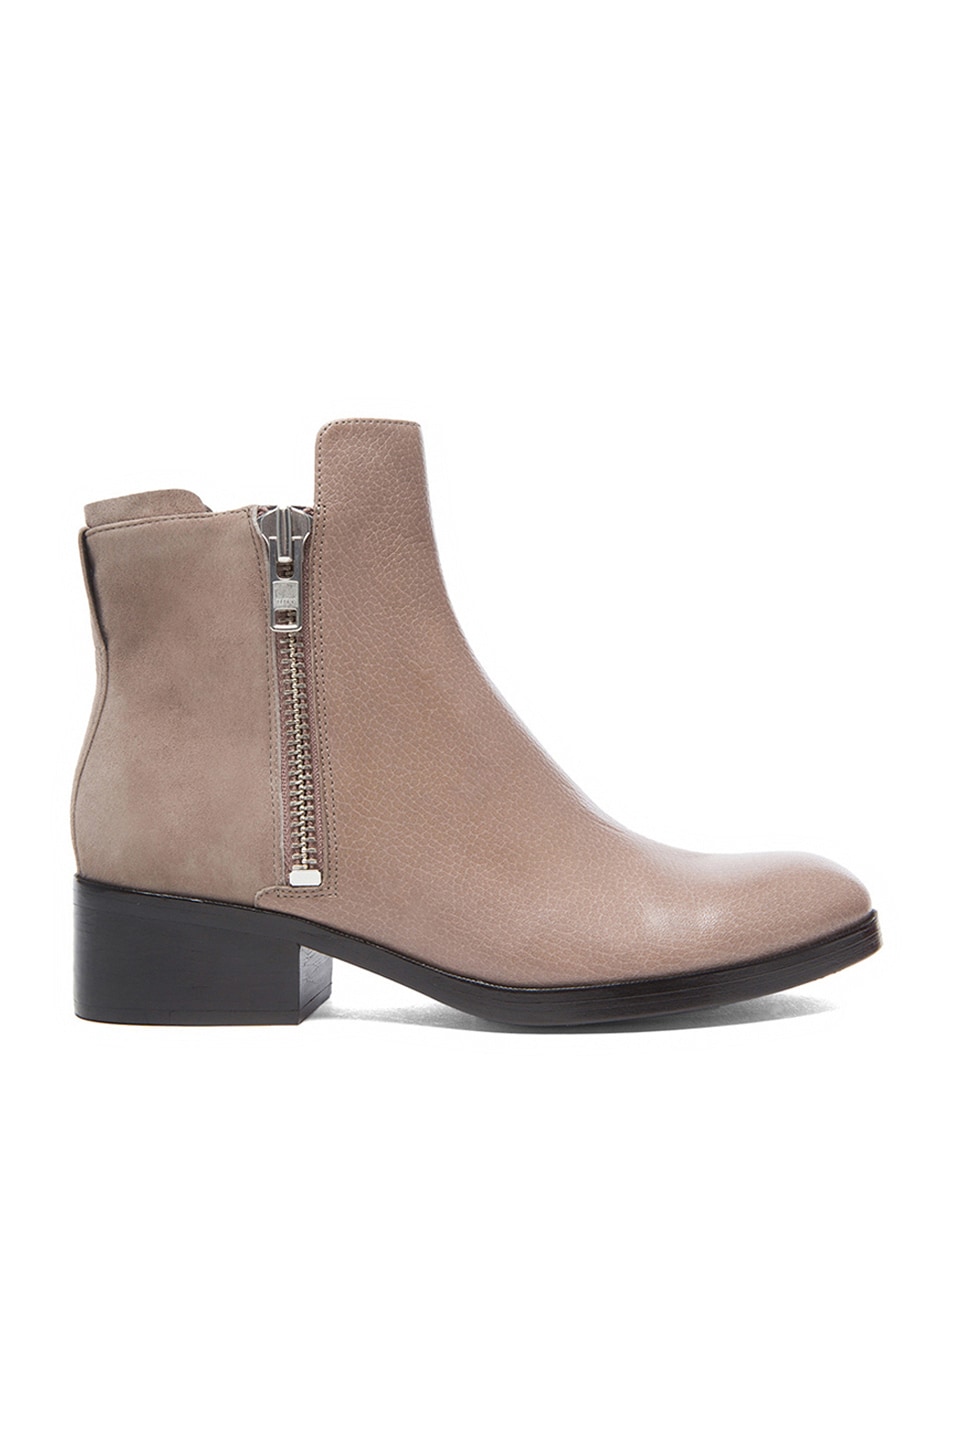 Image 1 of 3.1 phillip lim Alexa Leather Boots in Taupe